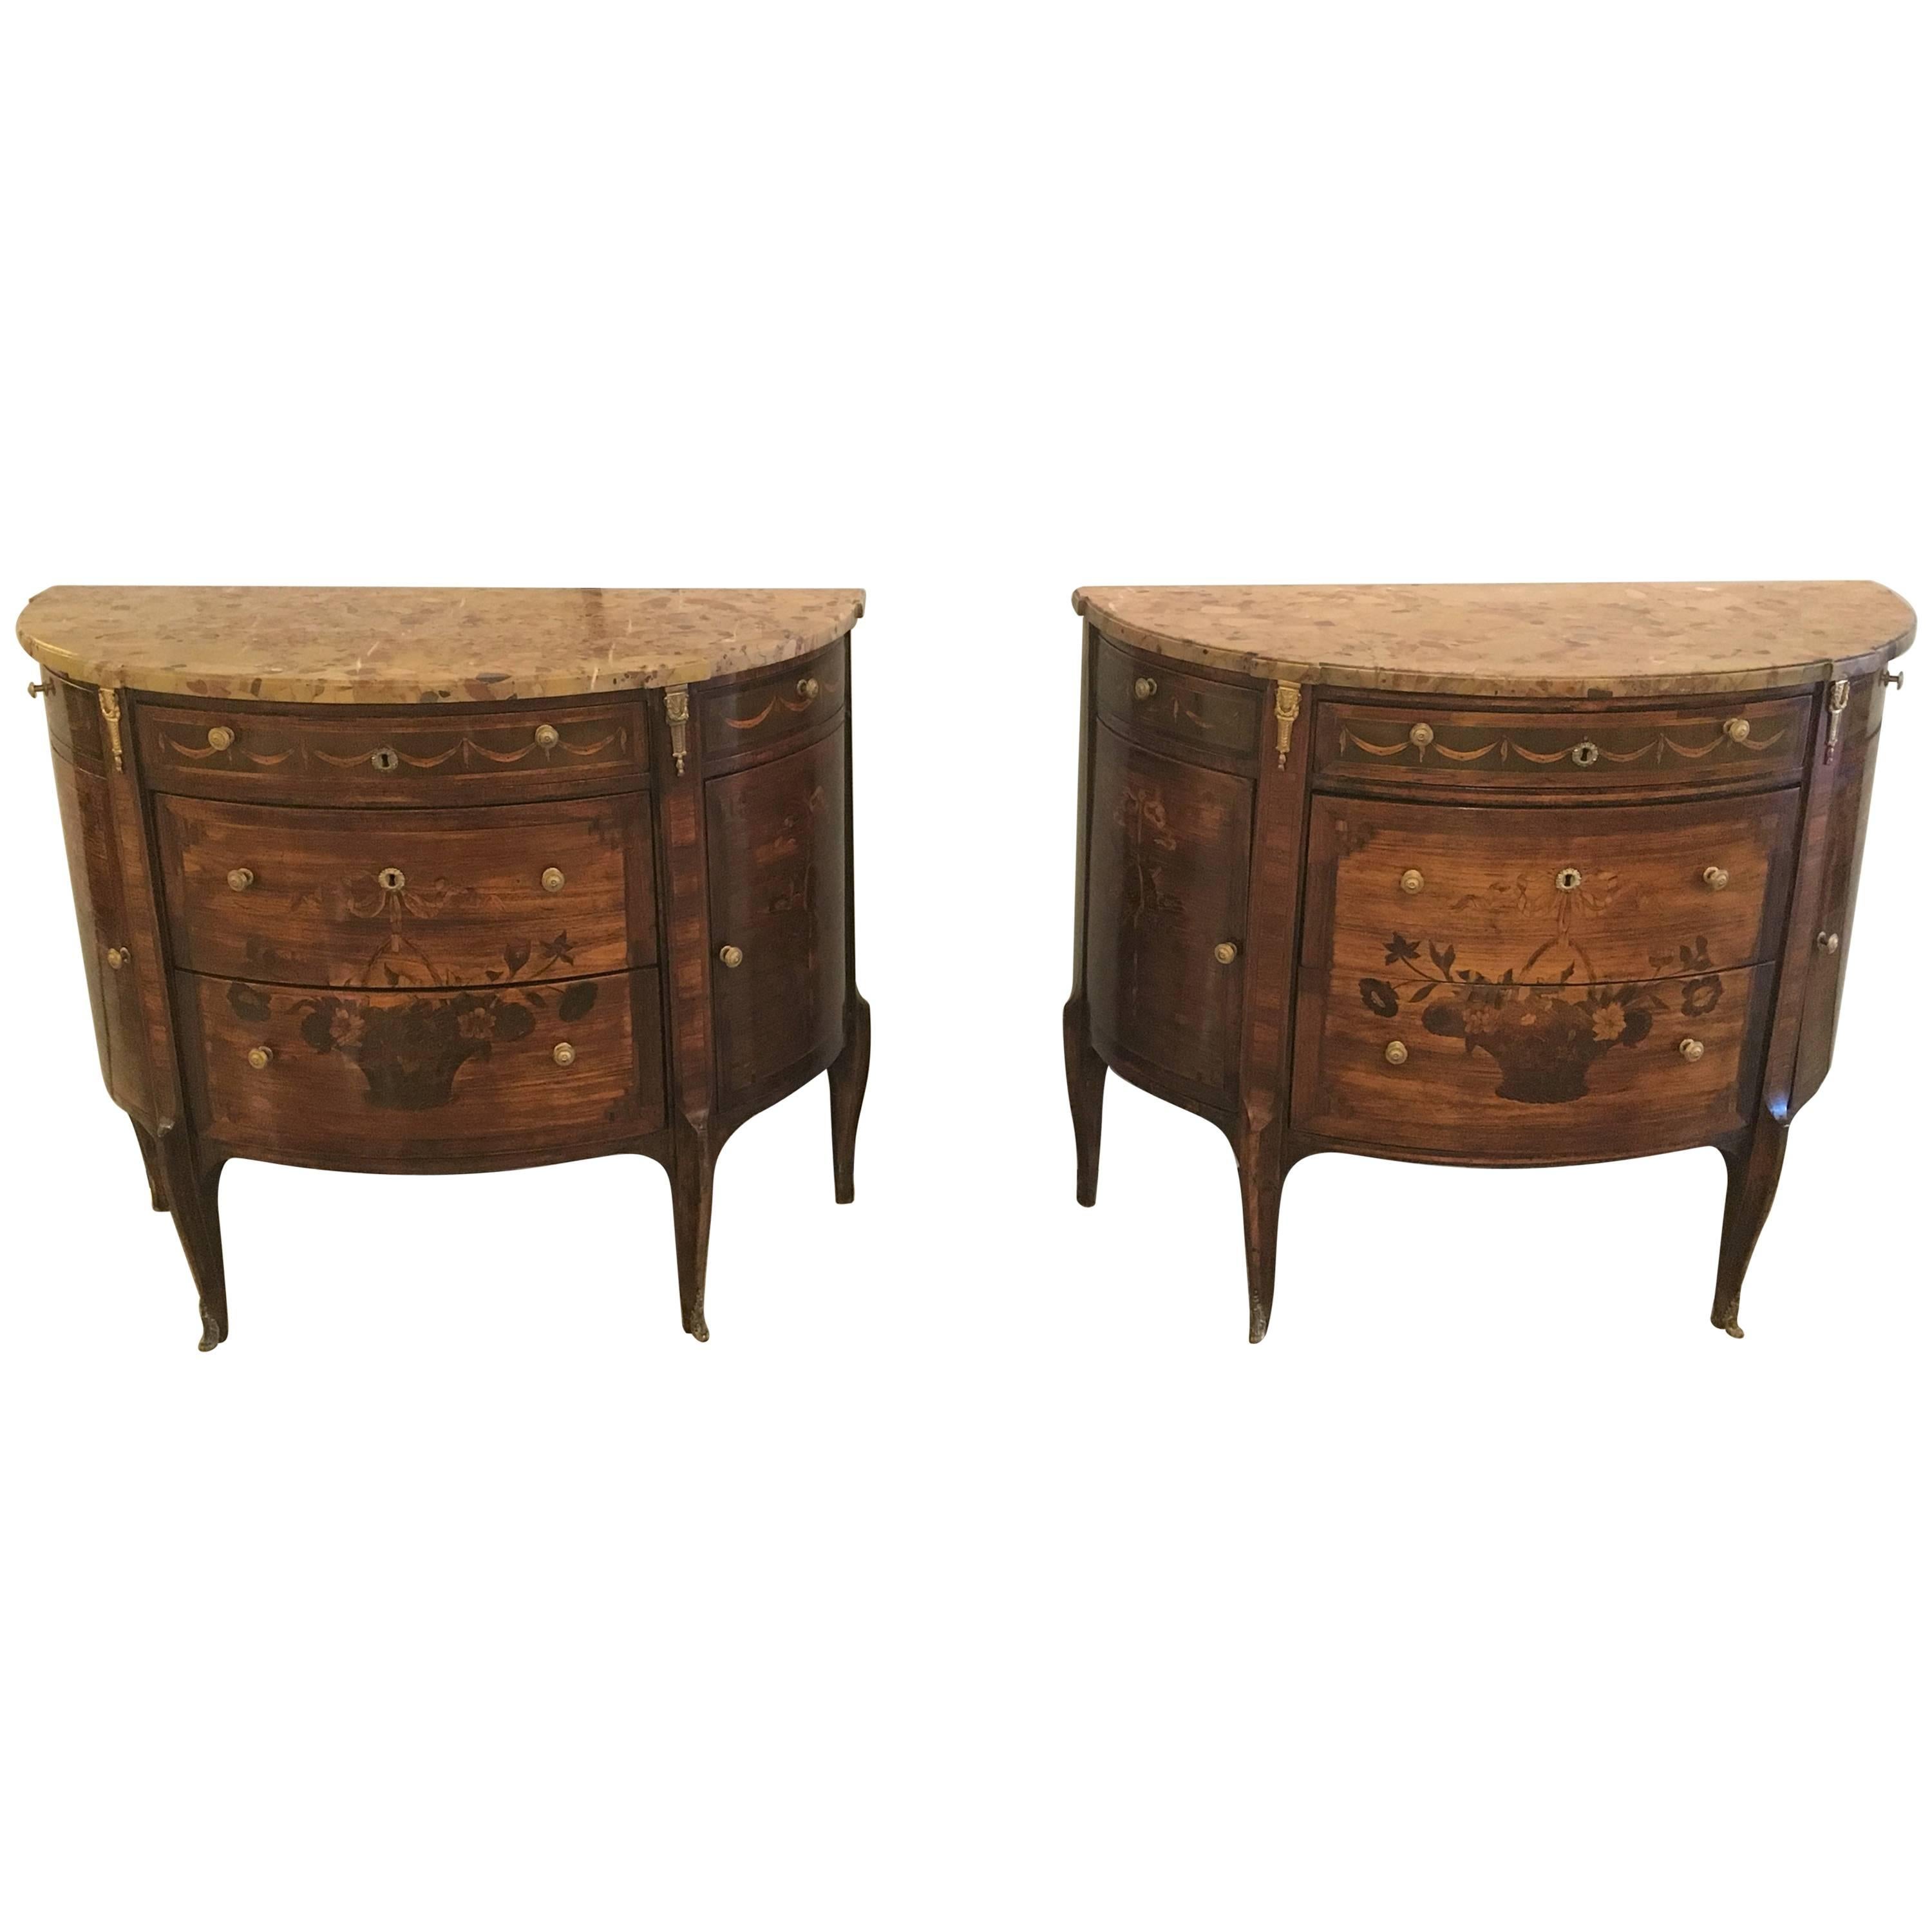 Pair of 19th Century French Louis XV Style Demilune Commode / Bedside Stands